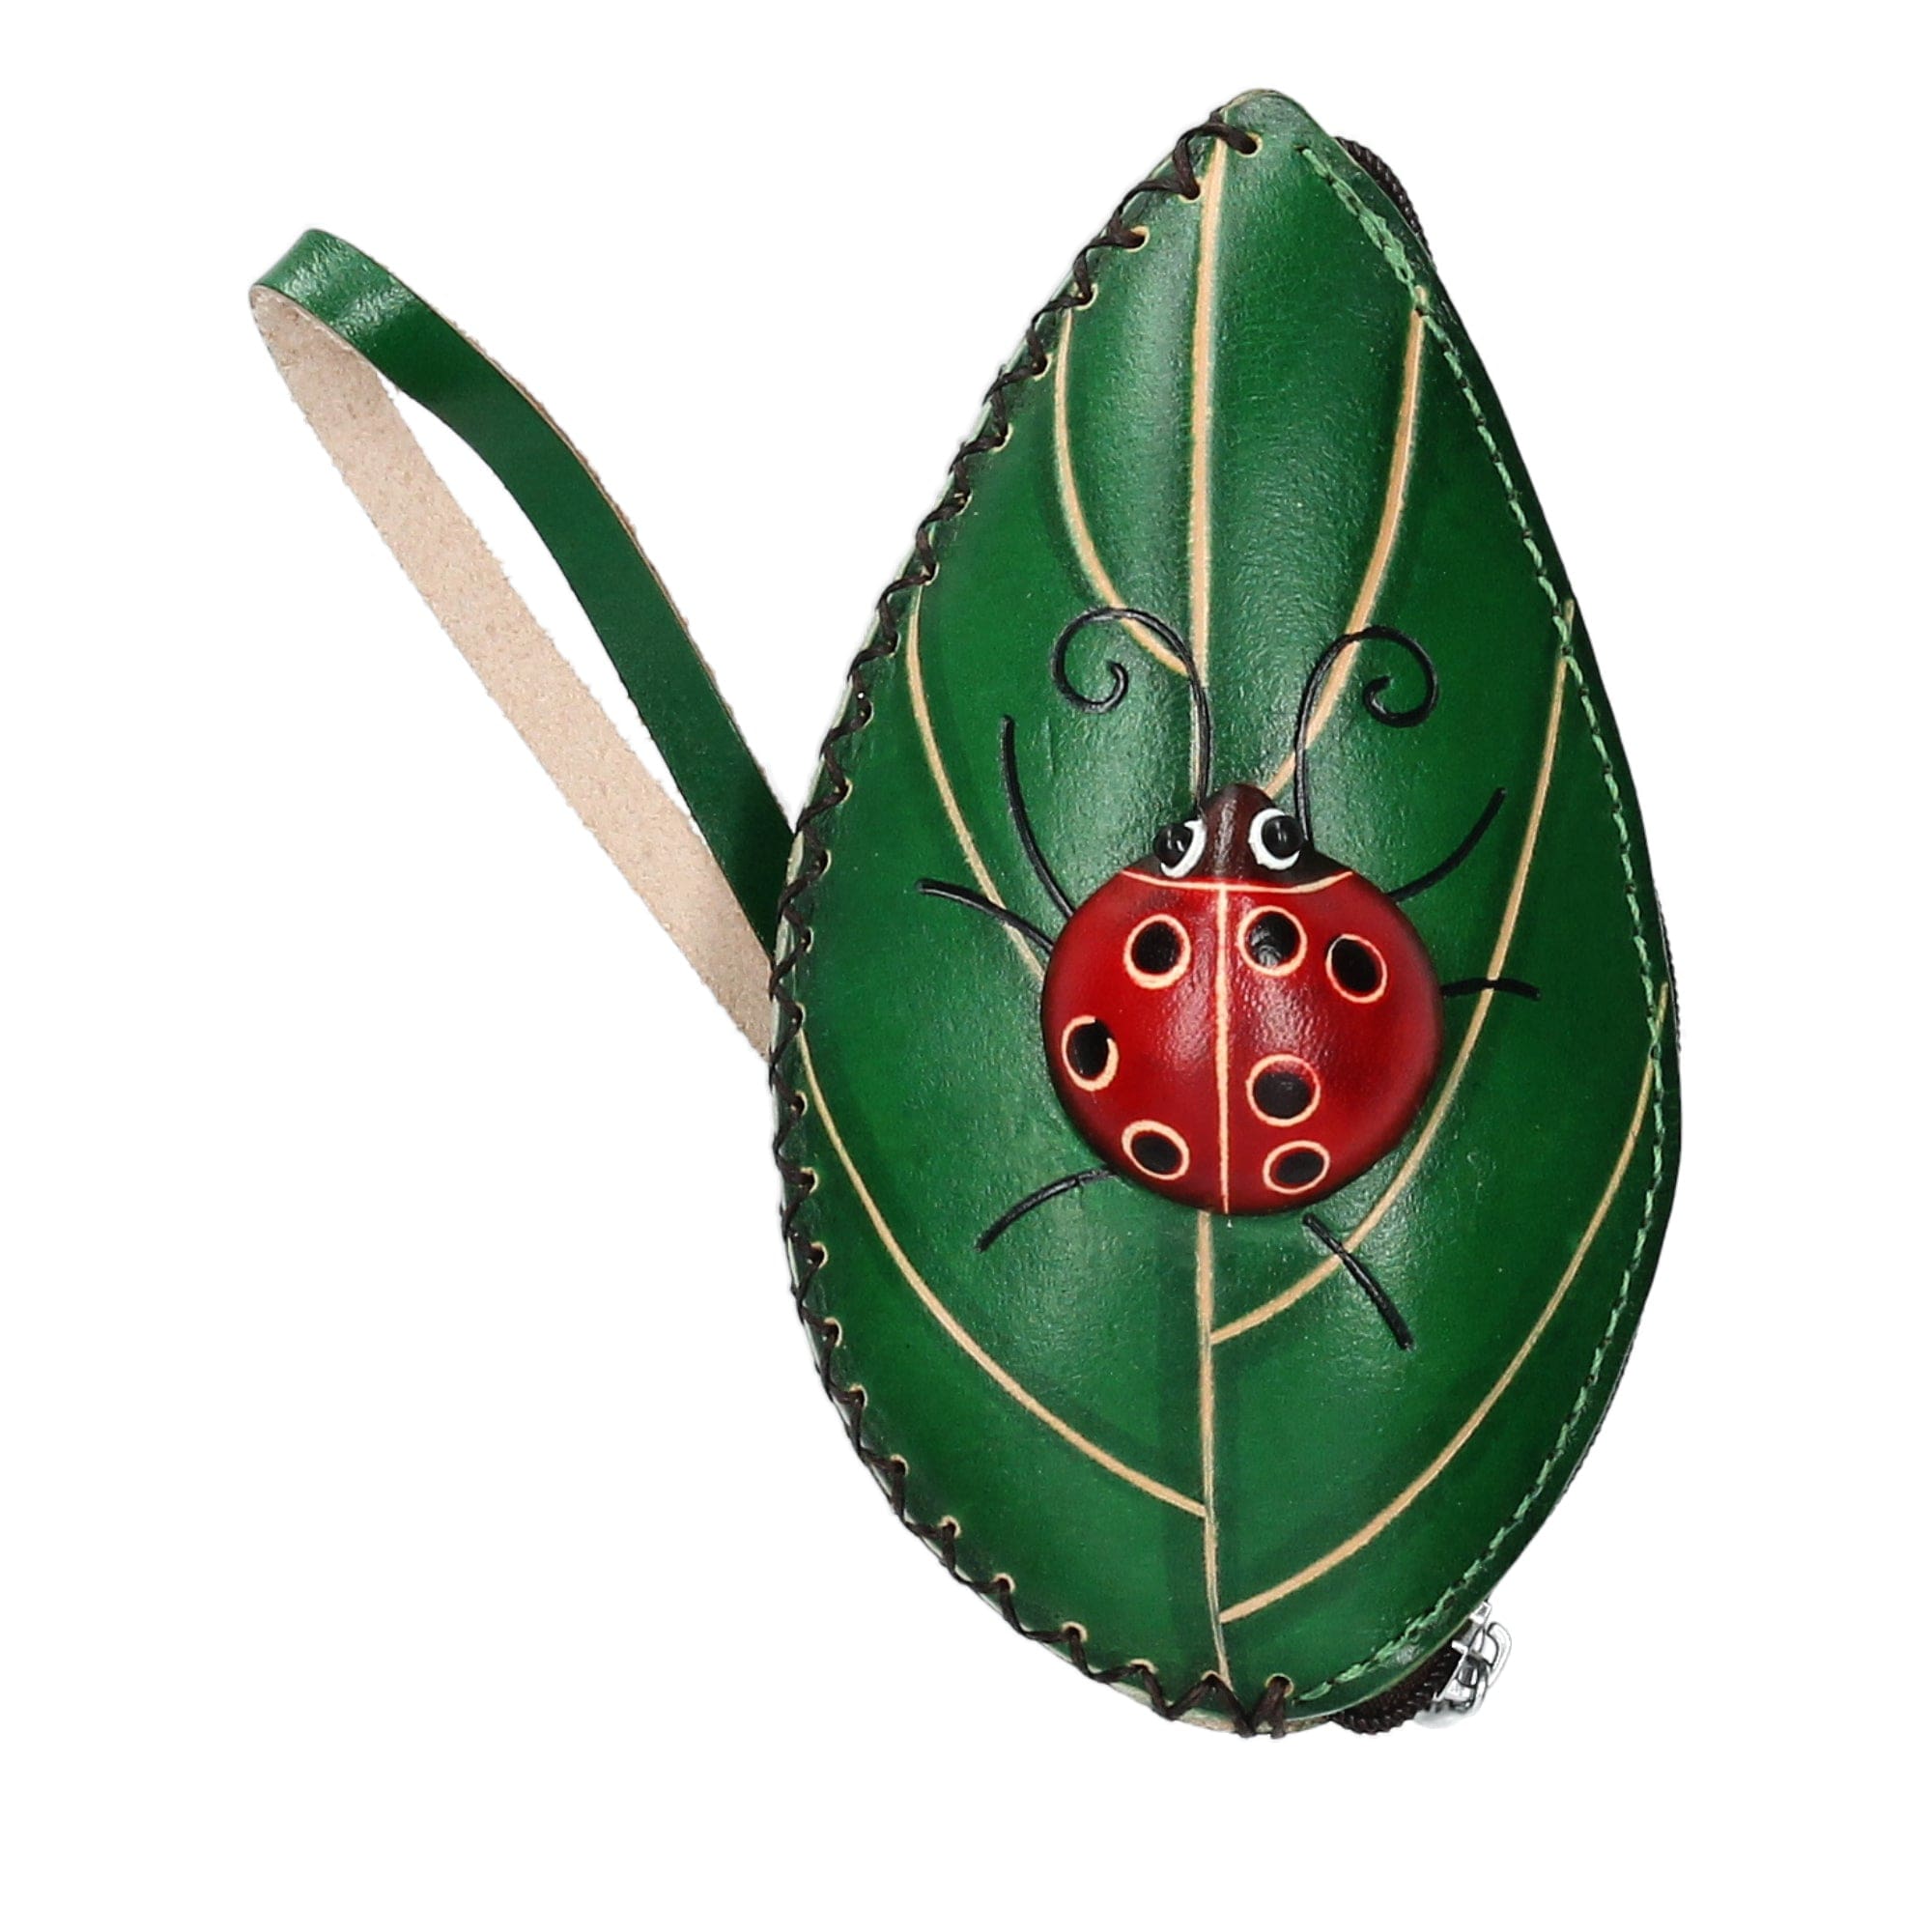 Leather trinkets - Green - Small leather goods